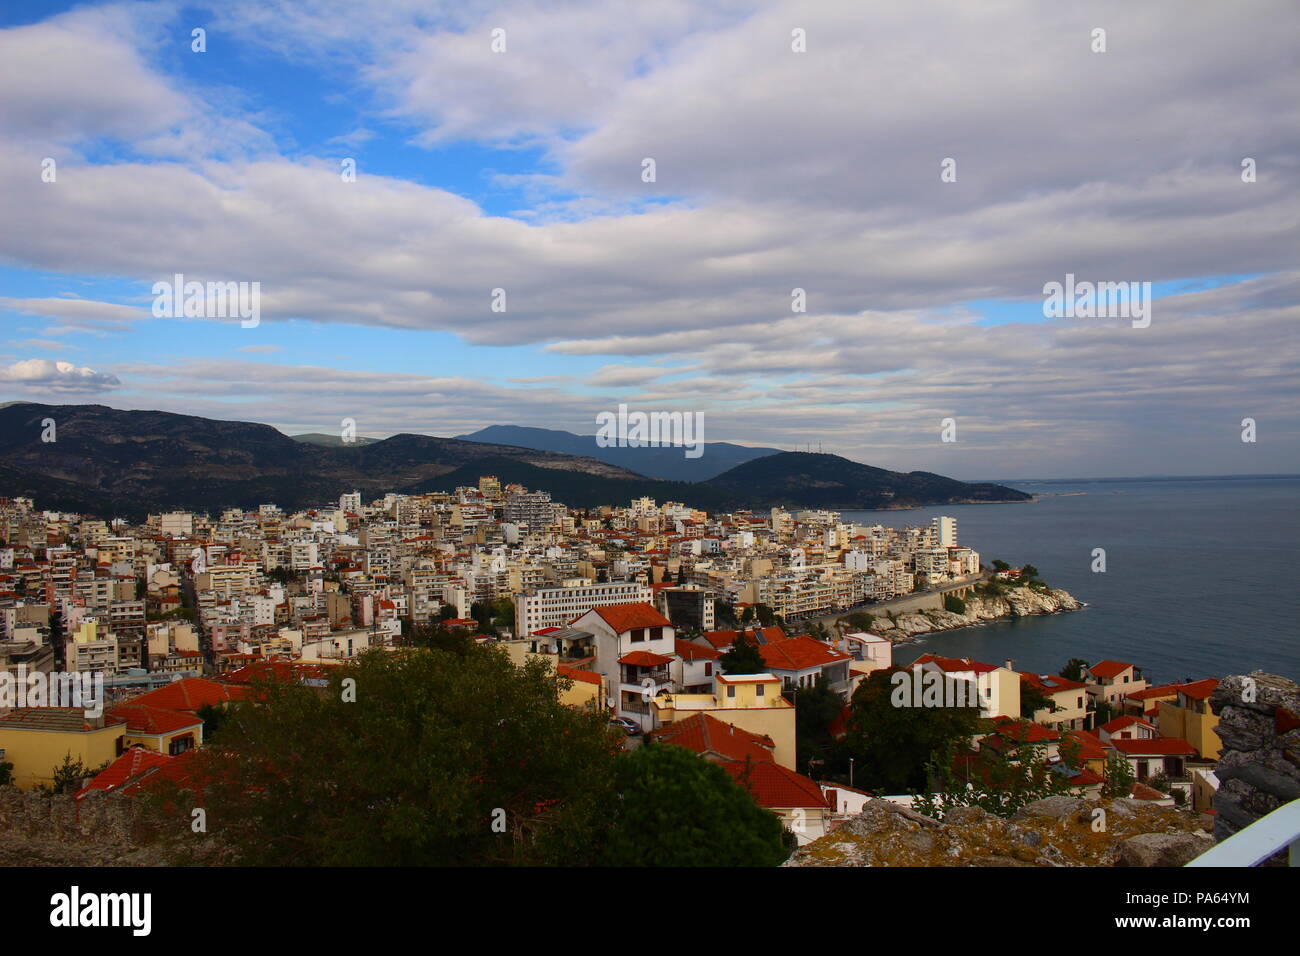 A high view picture of the city of Kavala, the Meditarranean sea and mountains Stock Photo